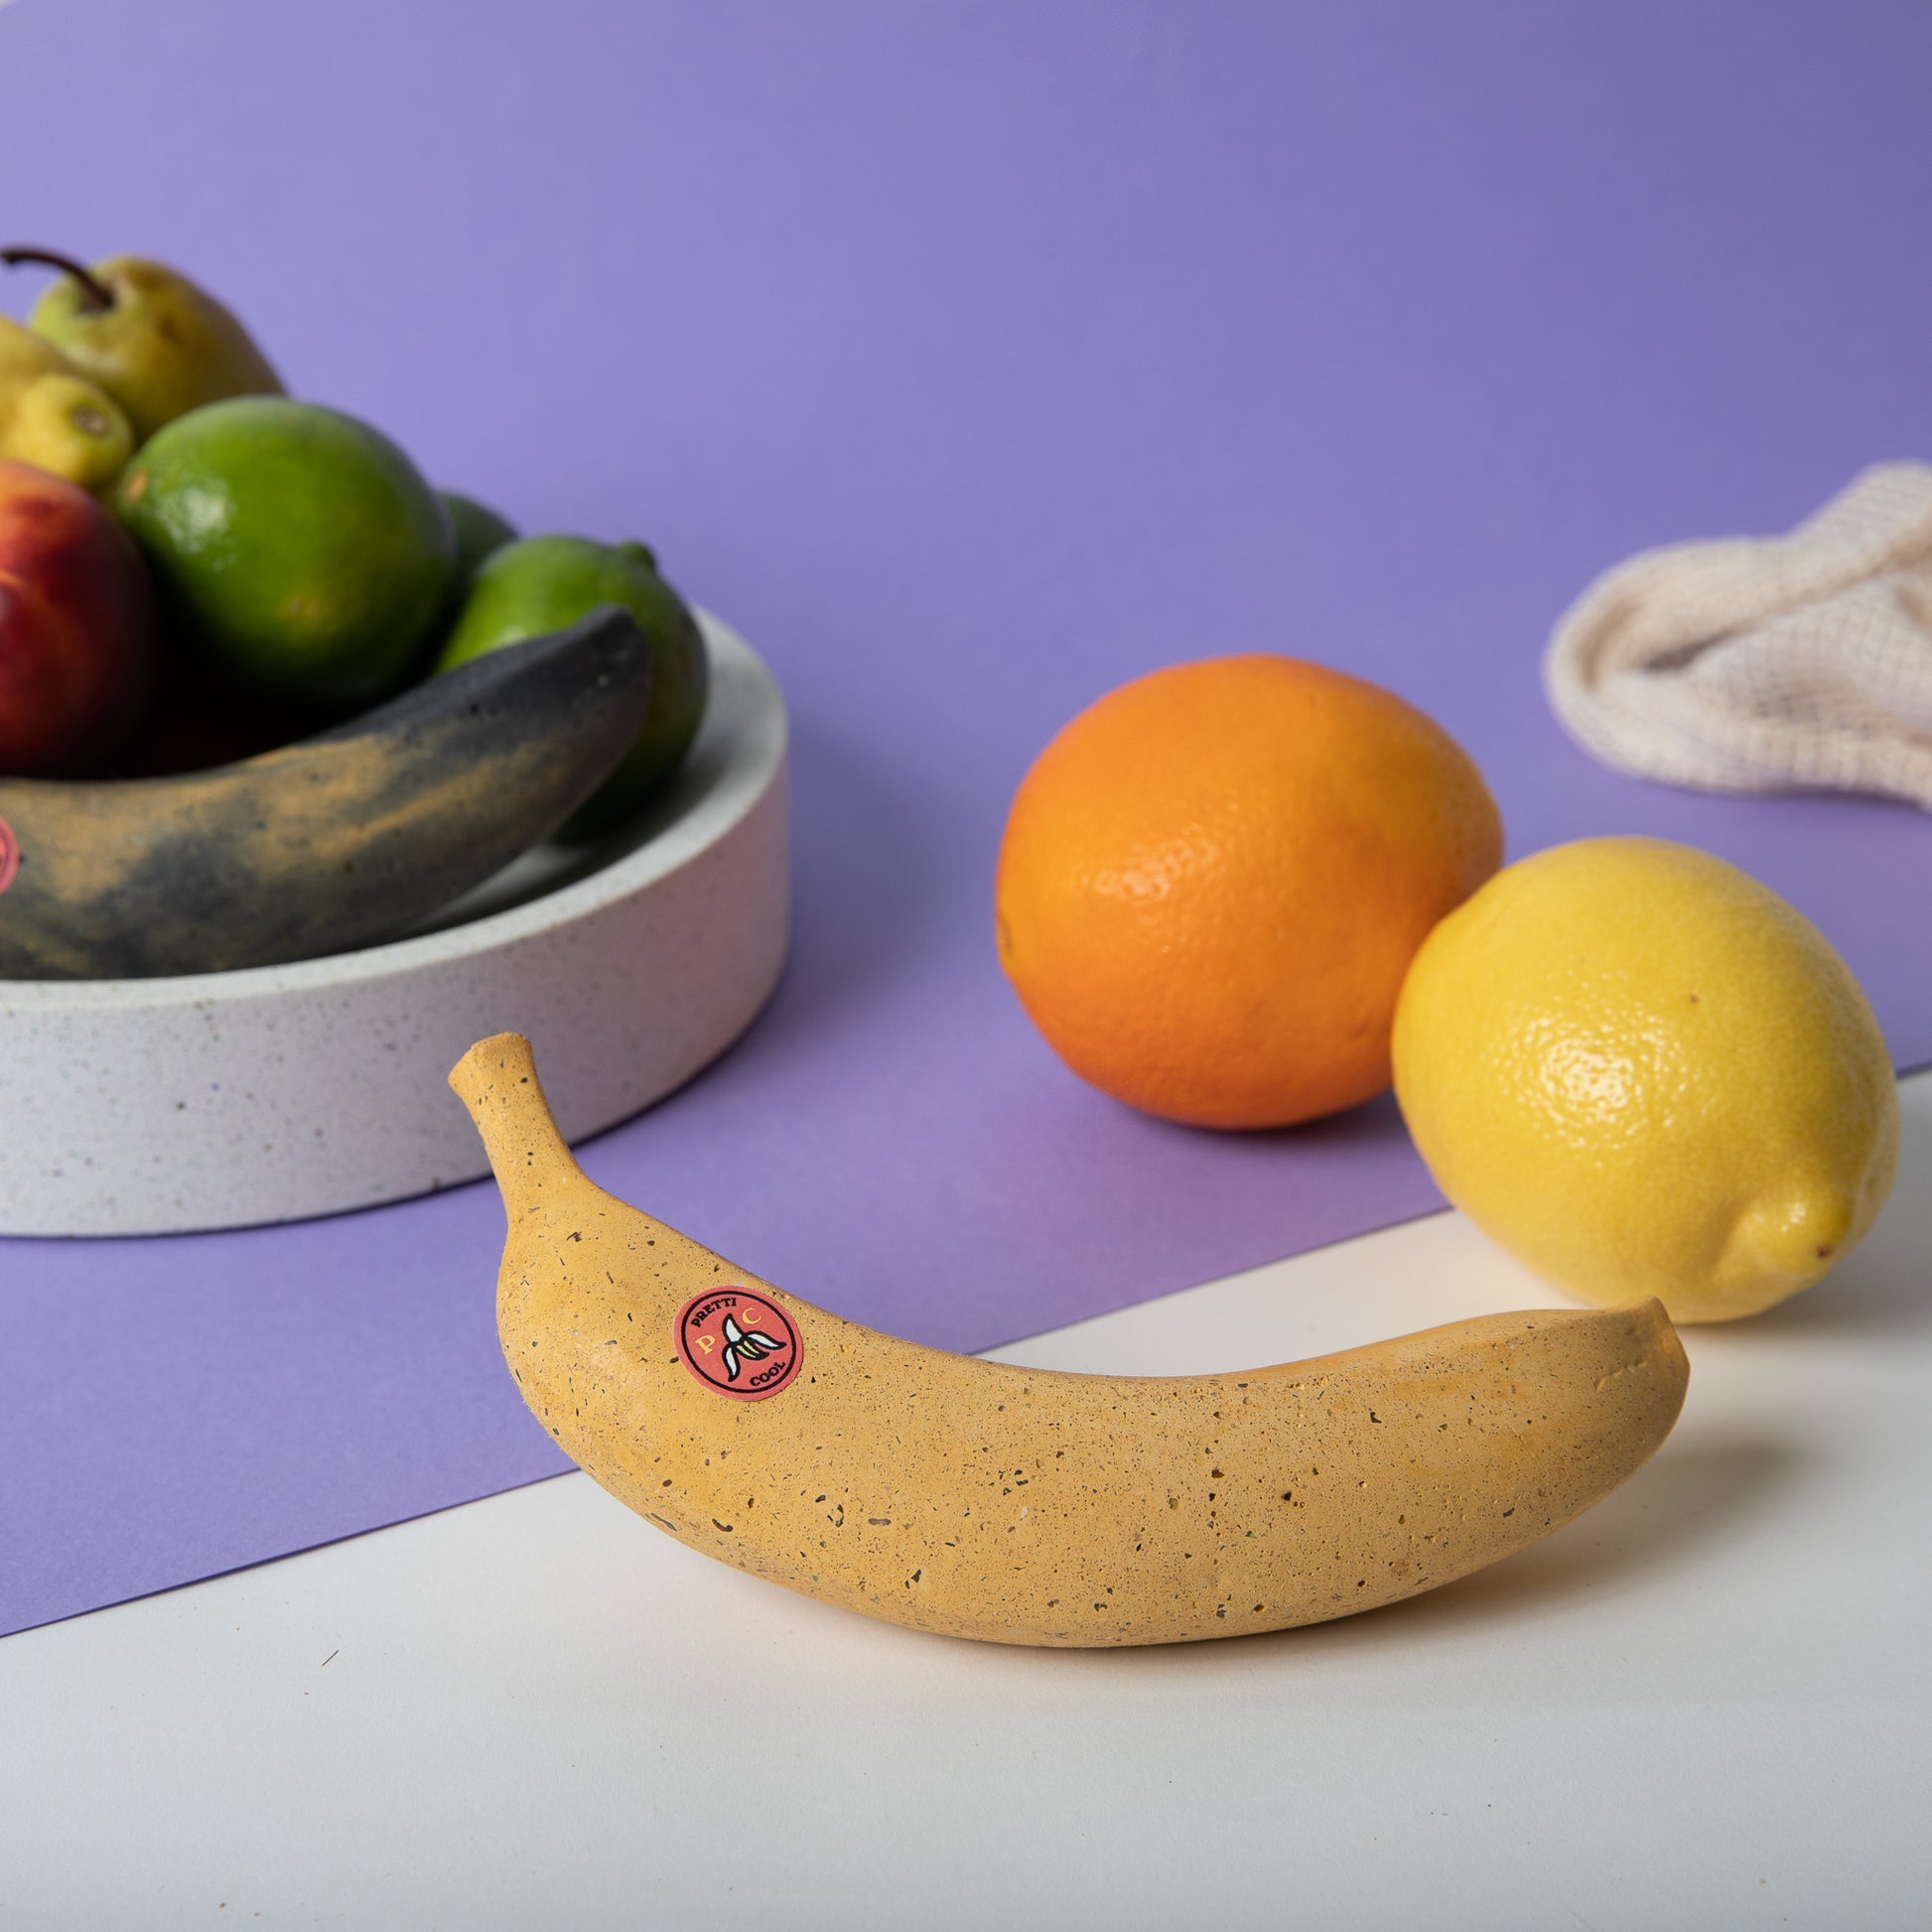 Concrete banana ripe in front of other real fruit.